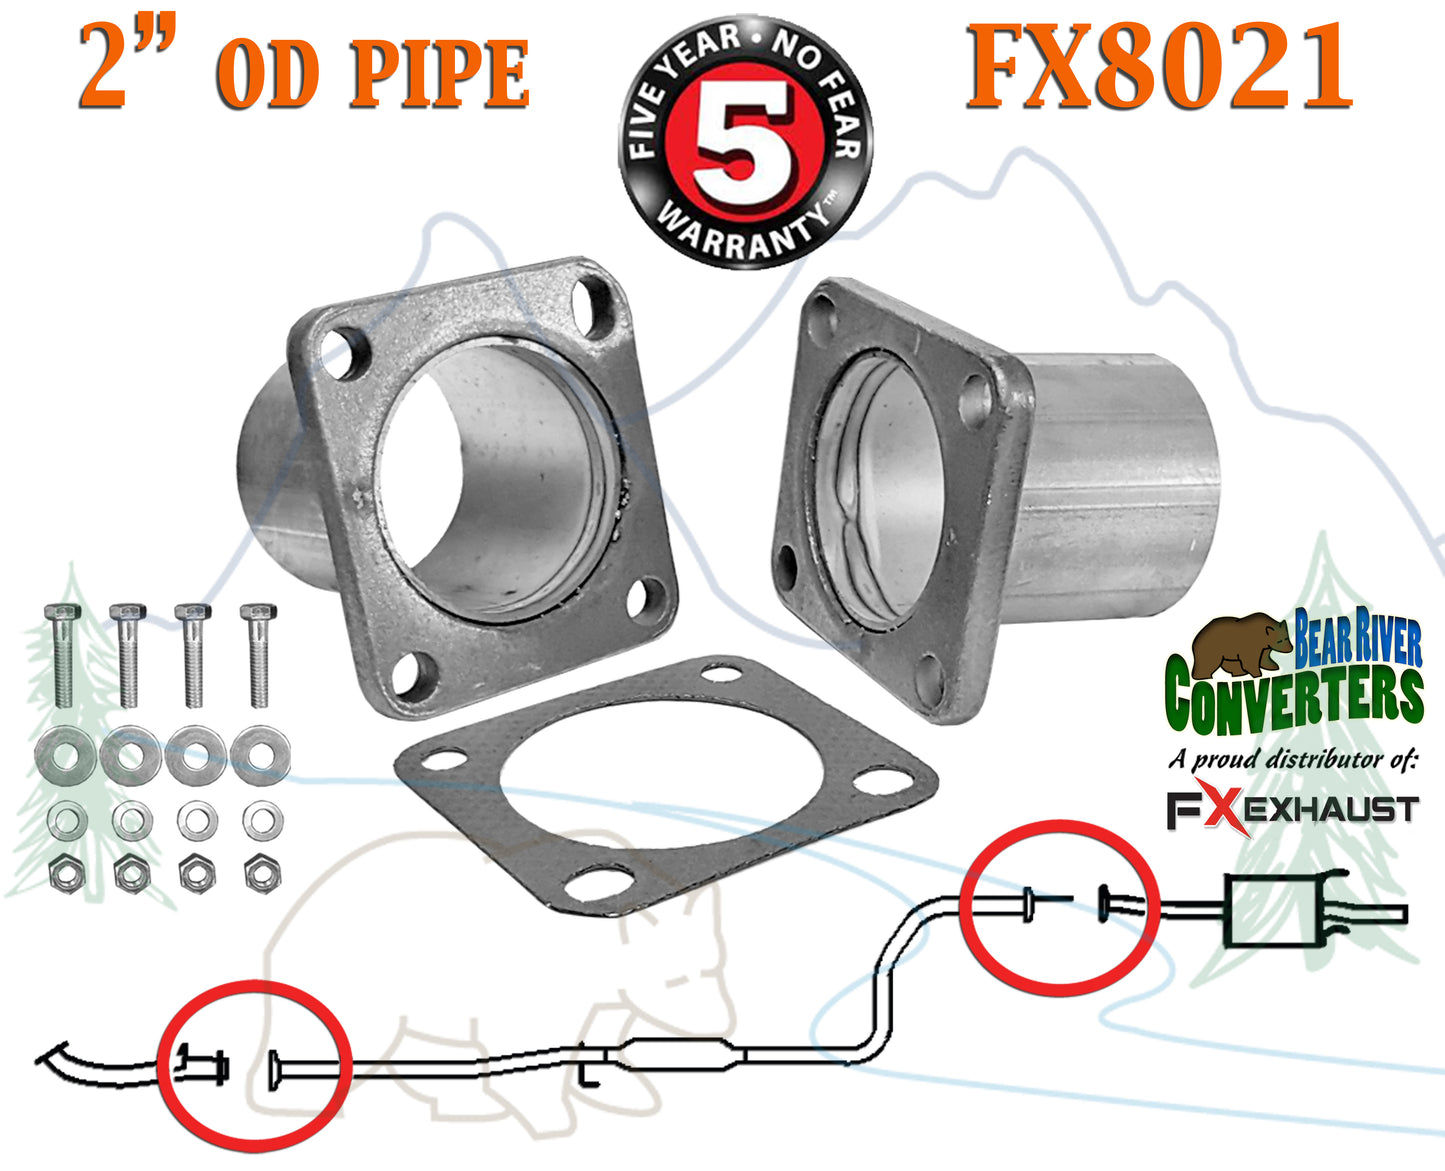 FX8021 2" OD Universal QuickFix Exhaust Square Flange Repair Pipe Kit